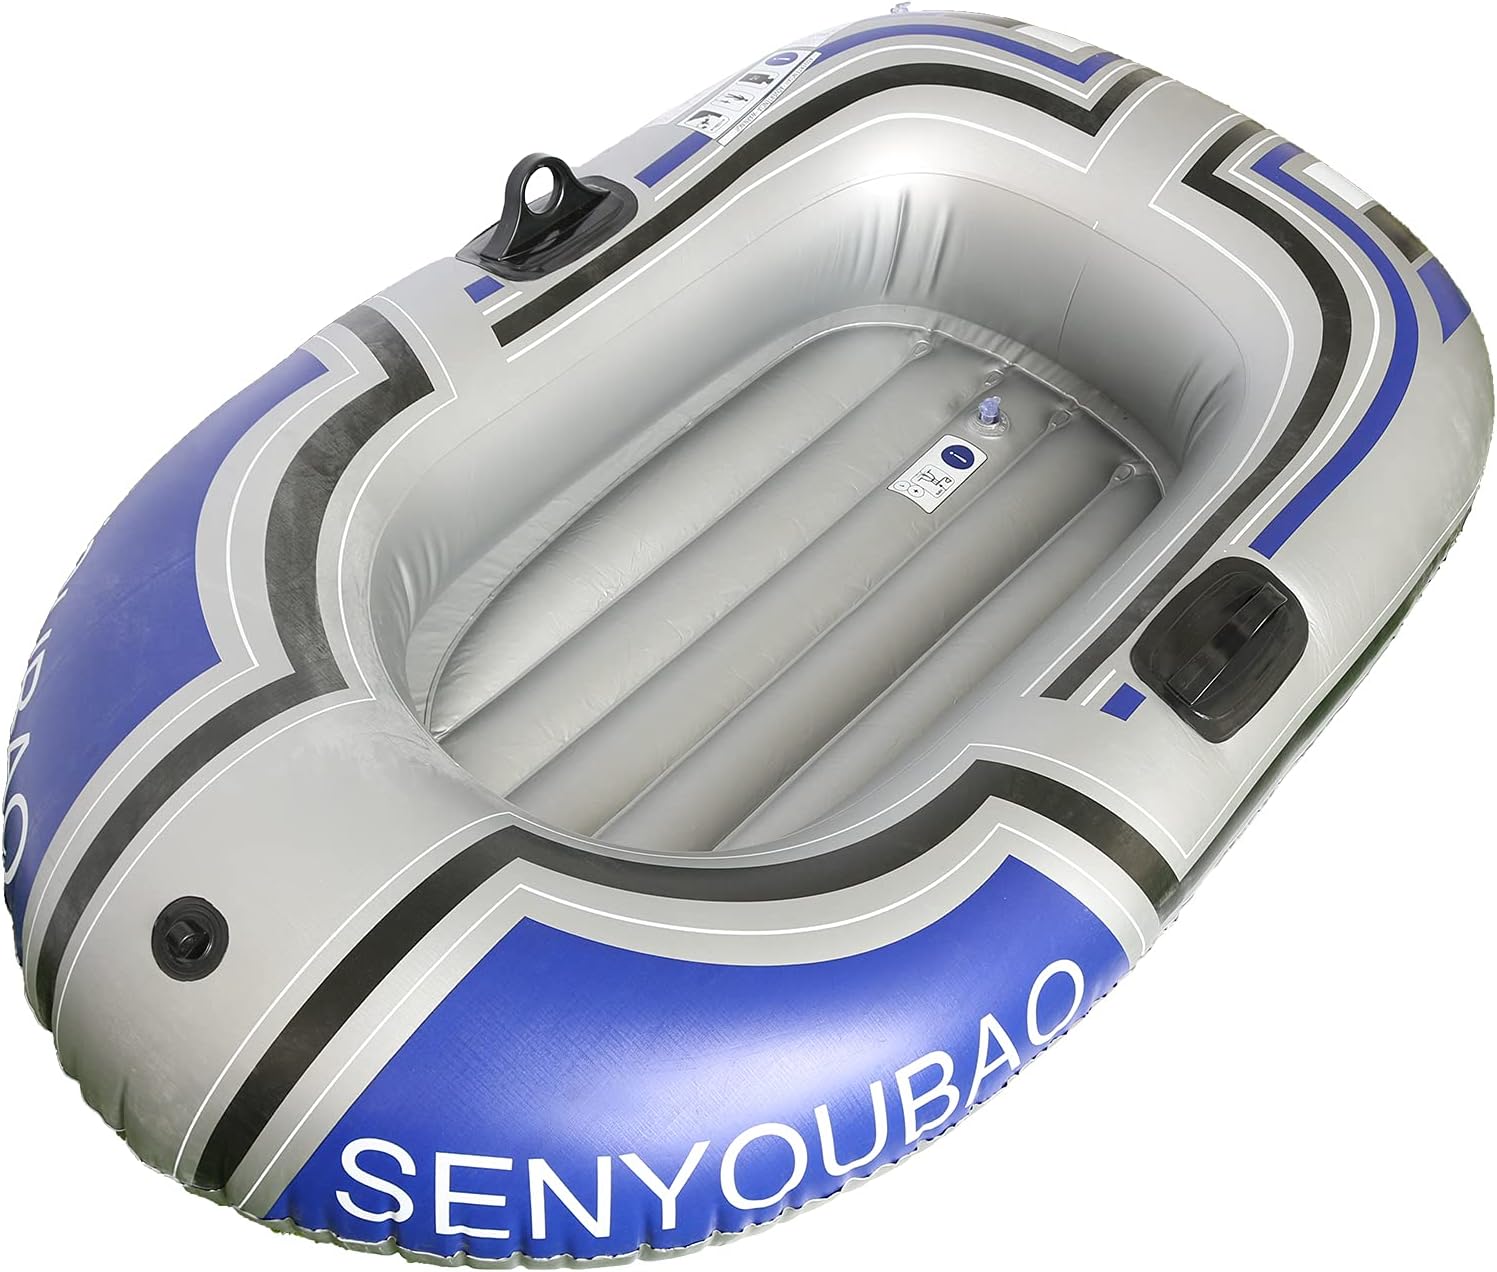 PLKO Inflatable Boat,Swimming Pool and Lake Inflatable Boat - PLKO Inflatable Boat Review